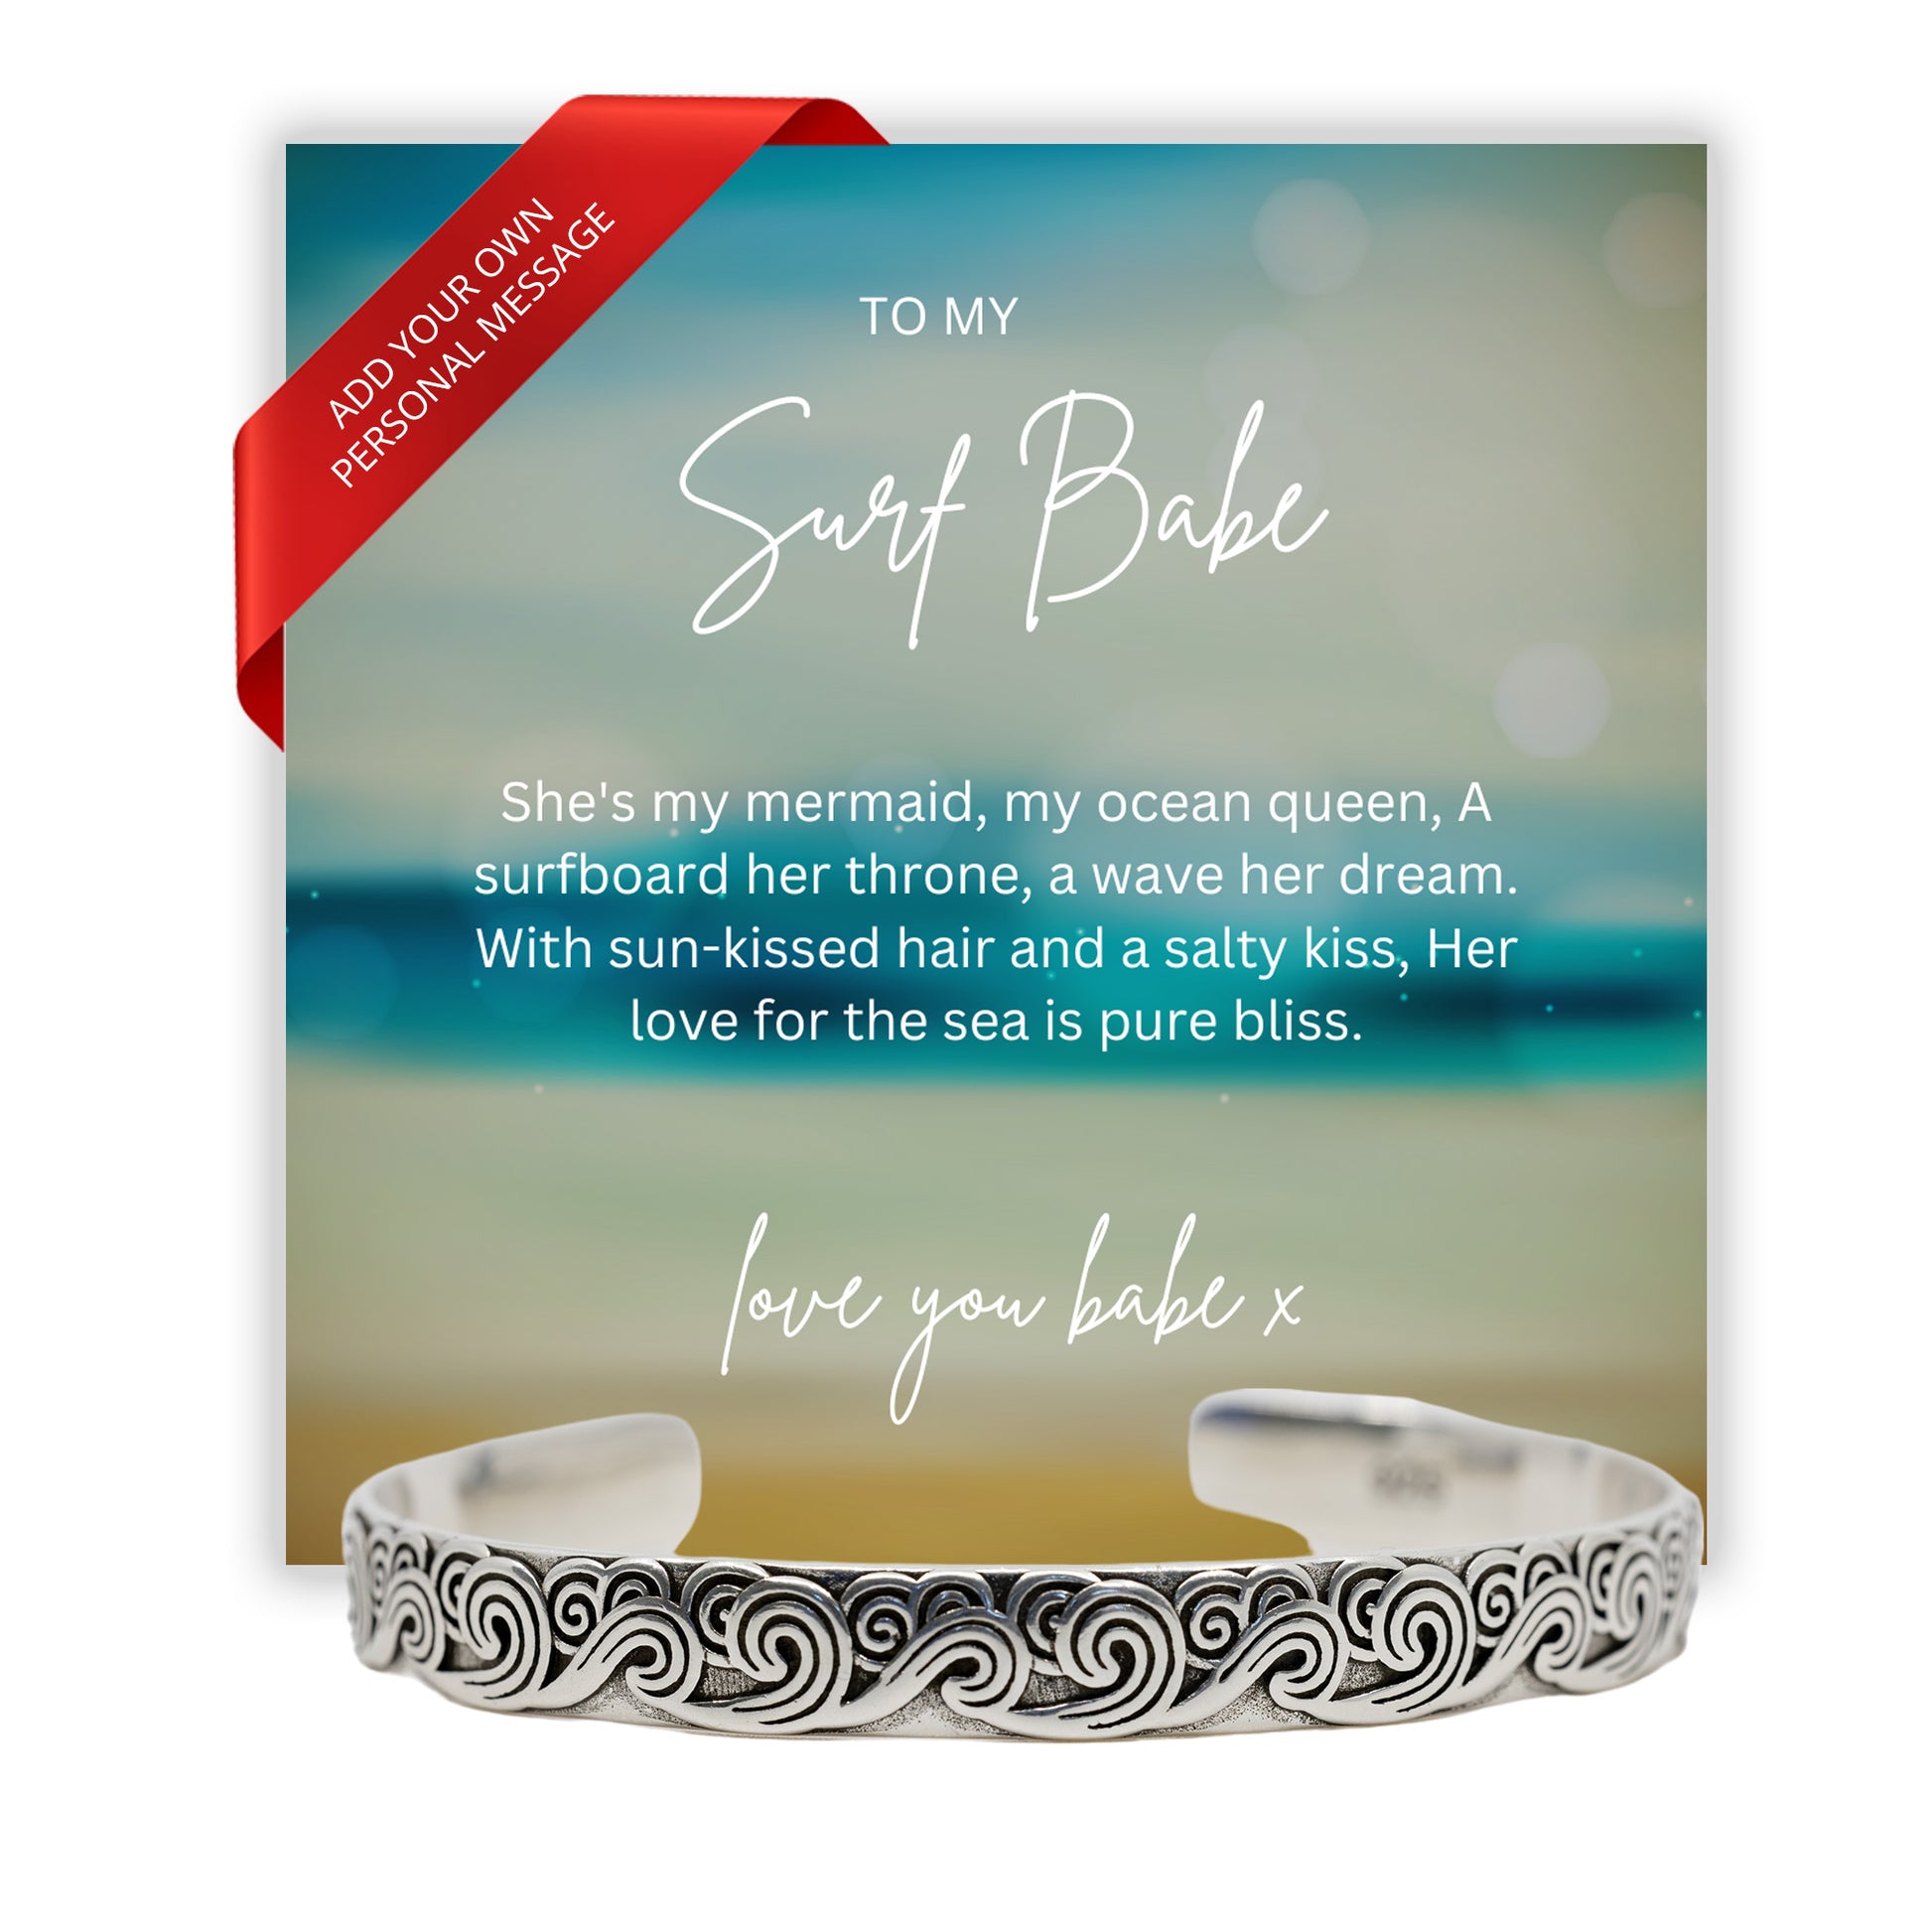 Sterling Silver Wave Bangle for Partner, Girlfirend Or Wife - To My Surf Babe